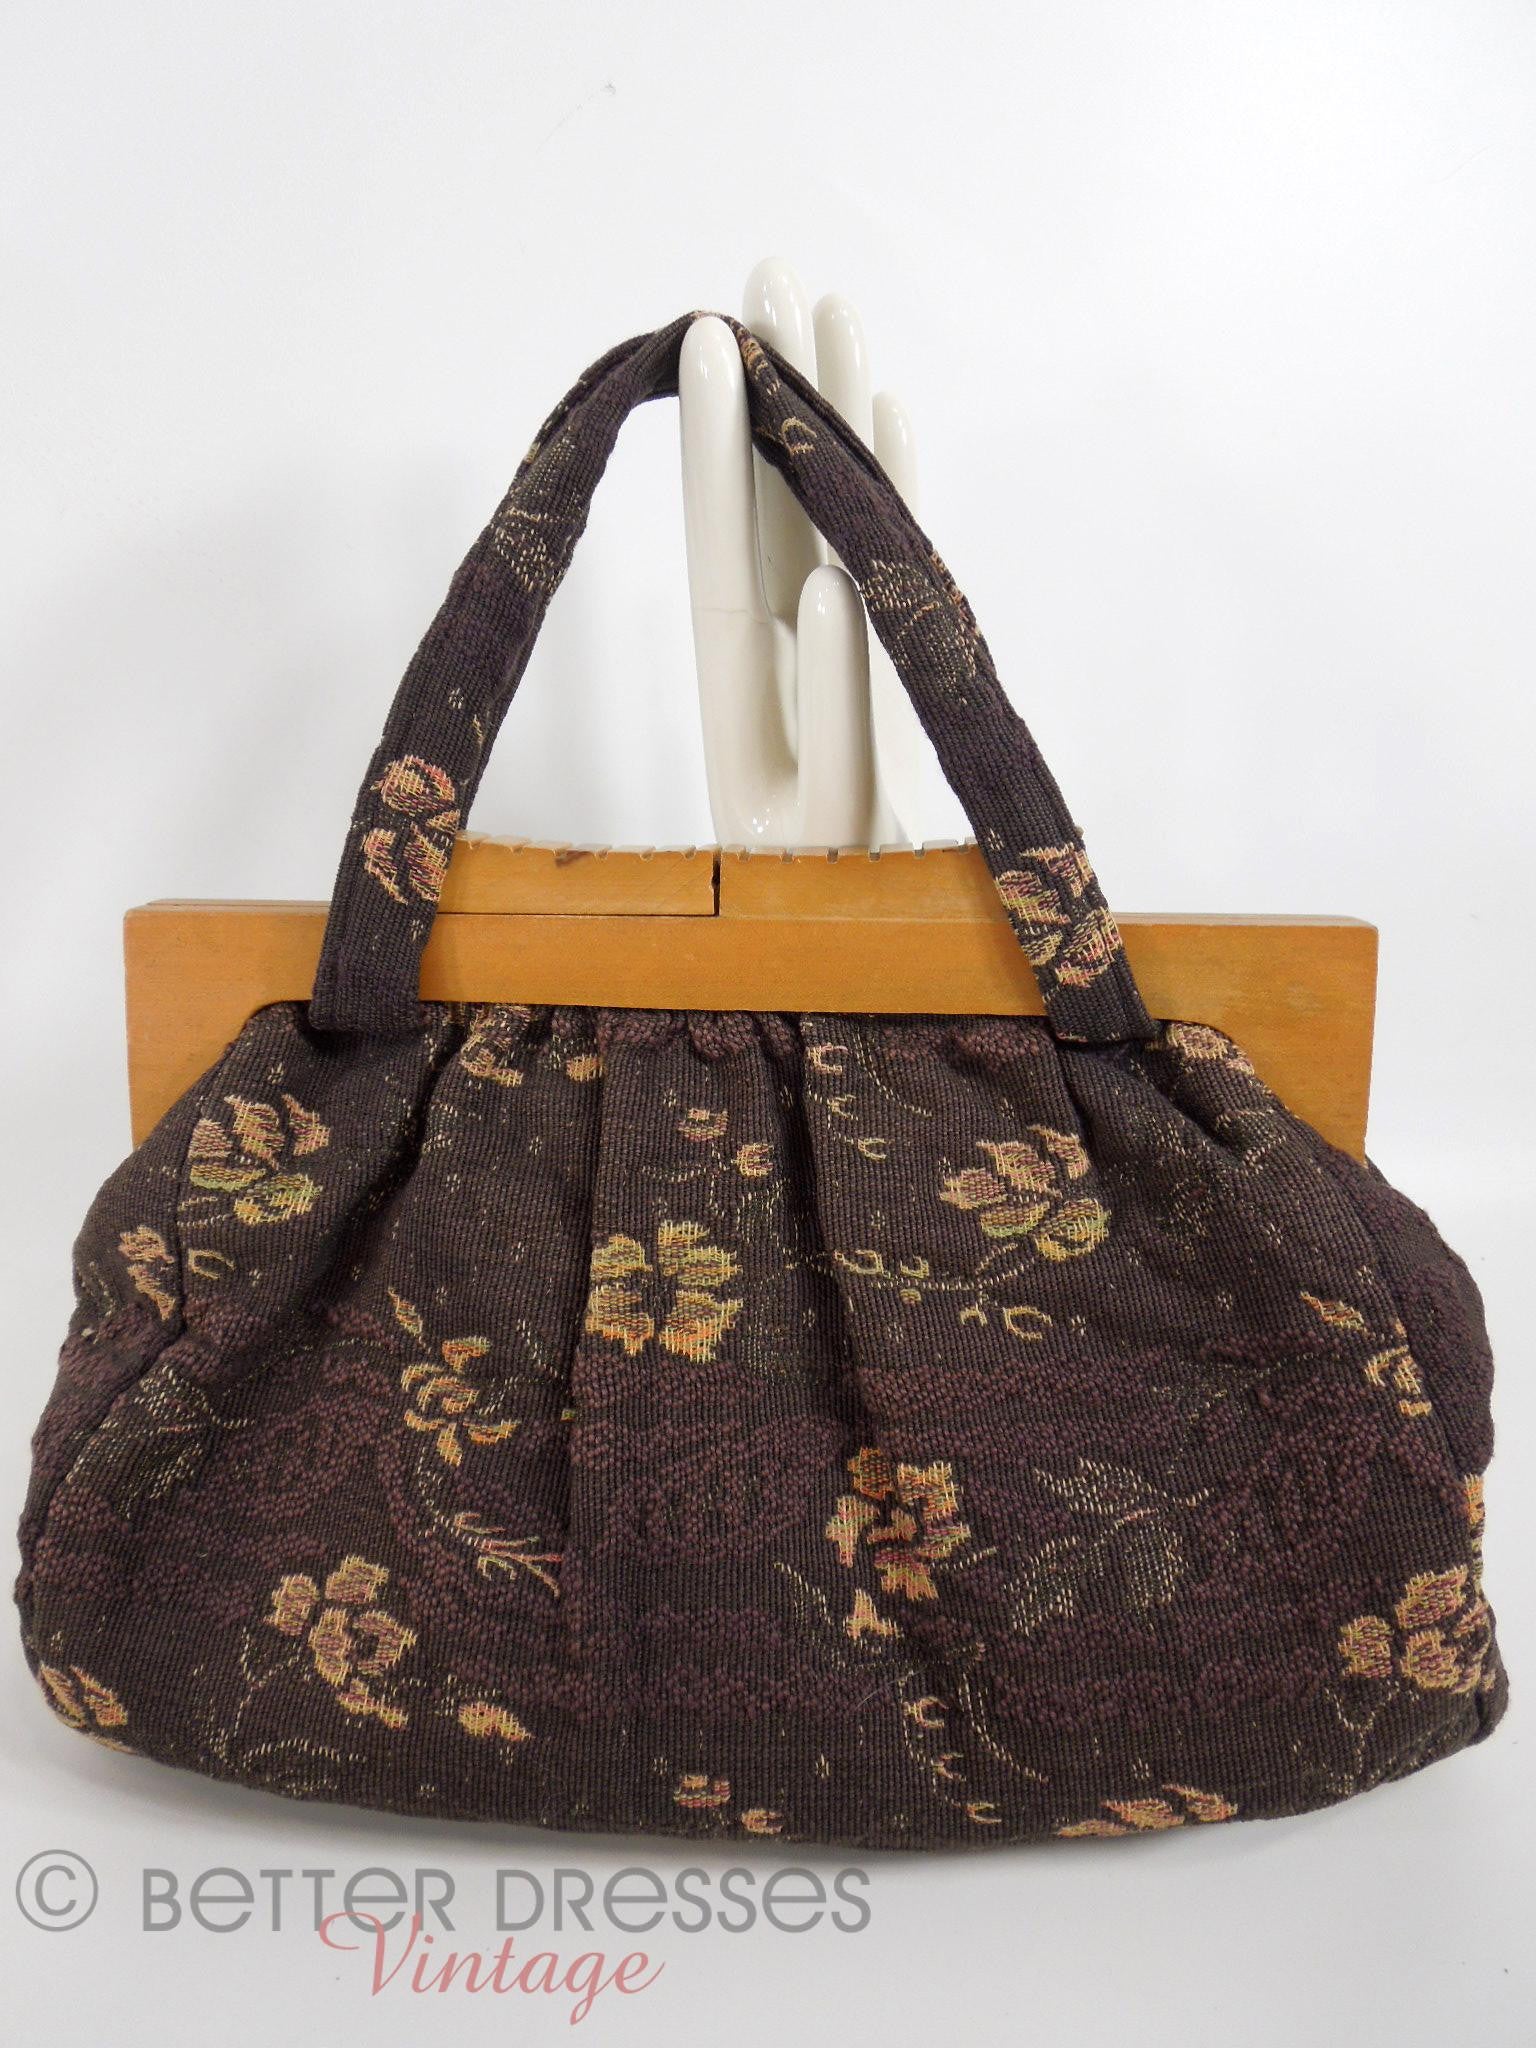 The Companion Carpet Bag - Full Tutorial|Sewing Patterns by Mrs. H - YouTube